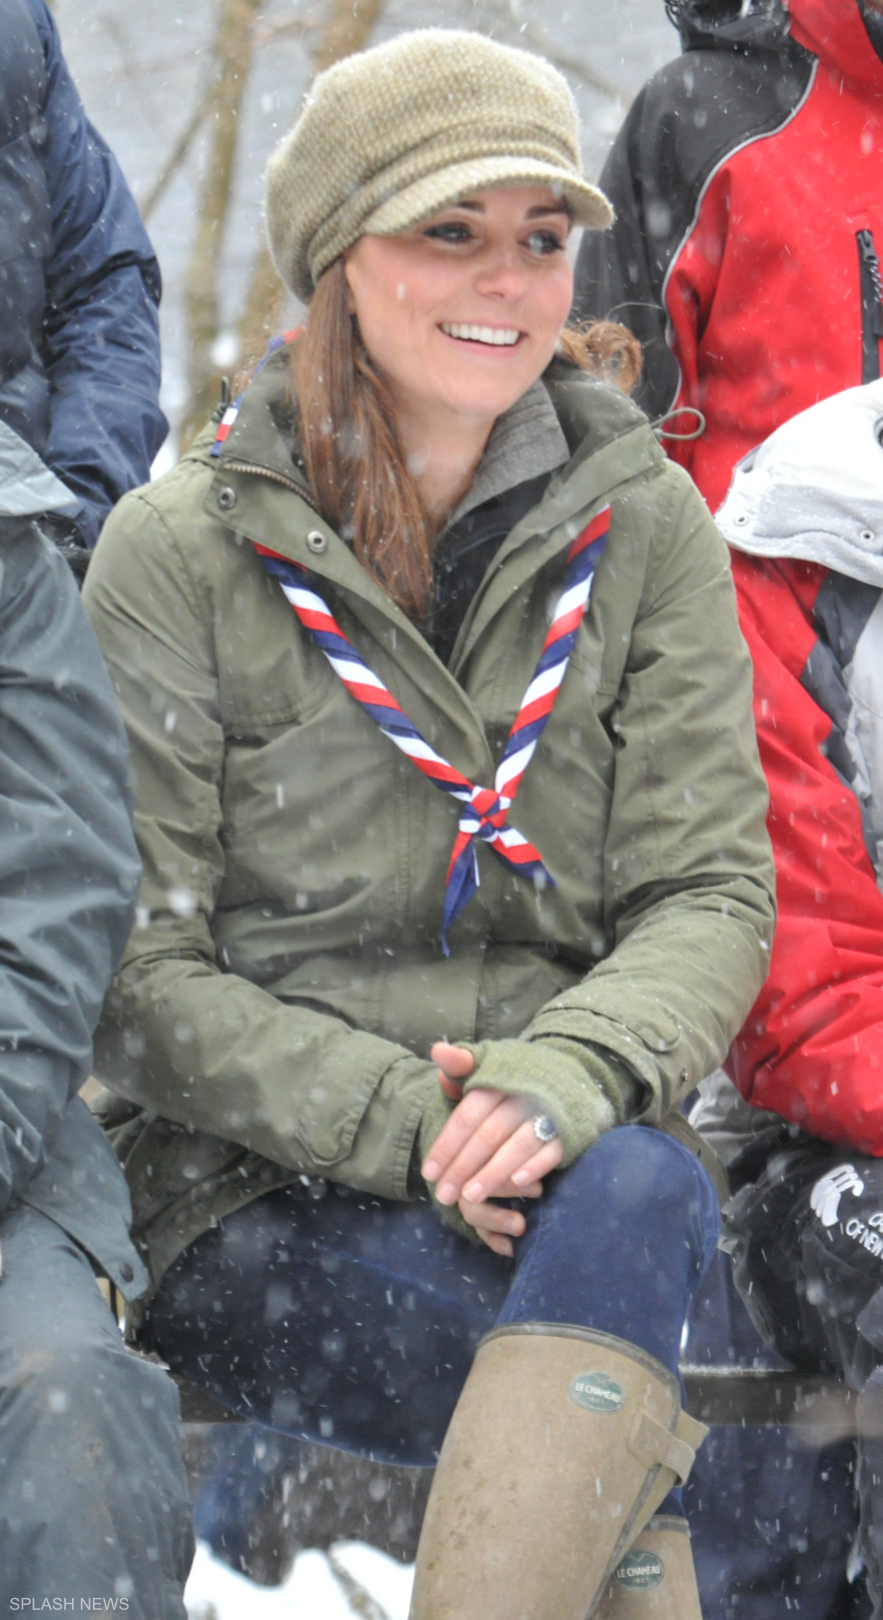 Rain boots fit for a princess! Kate Middleton wears the Le Chameau Vierzonord boots with neoprene lining during a visit to a Scout camp on a snowy day